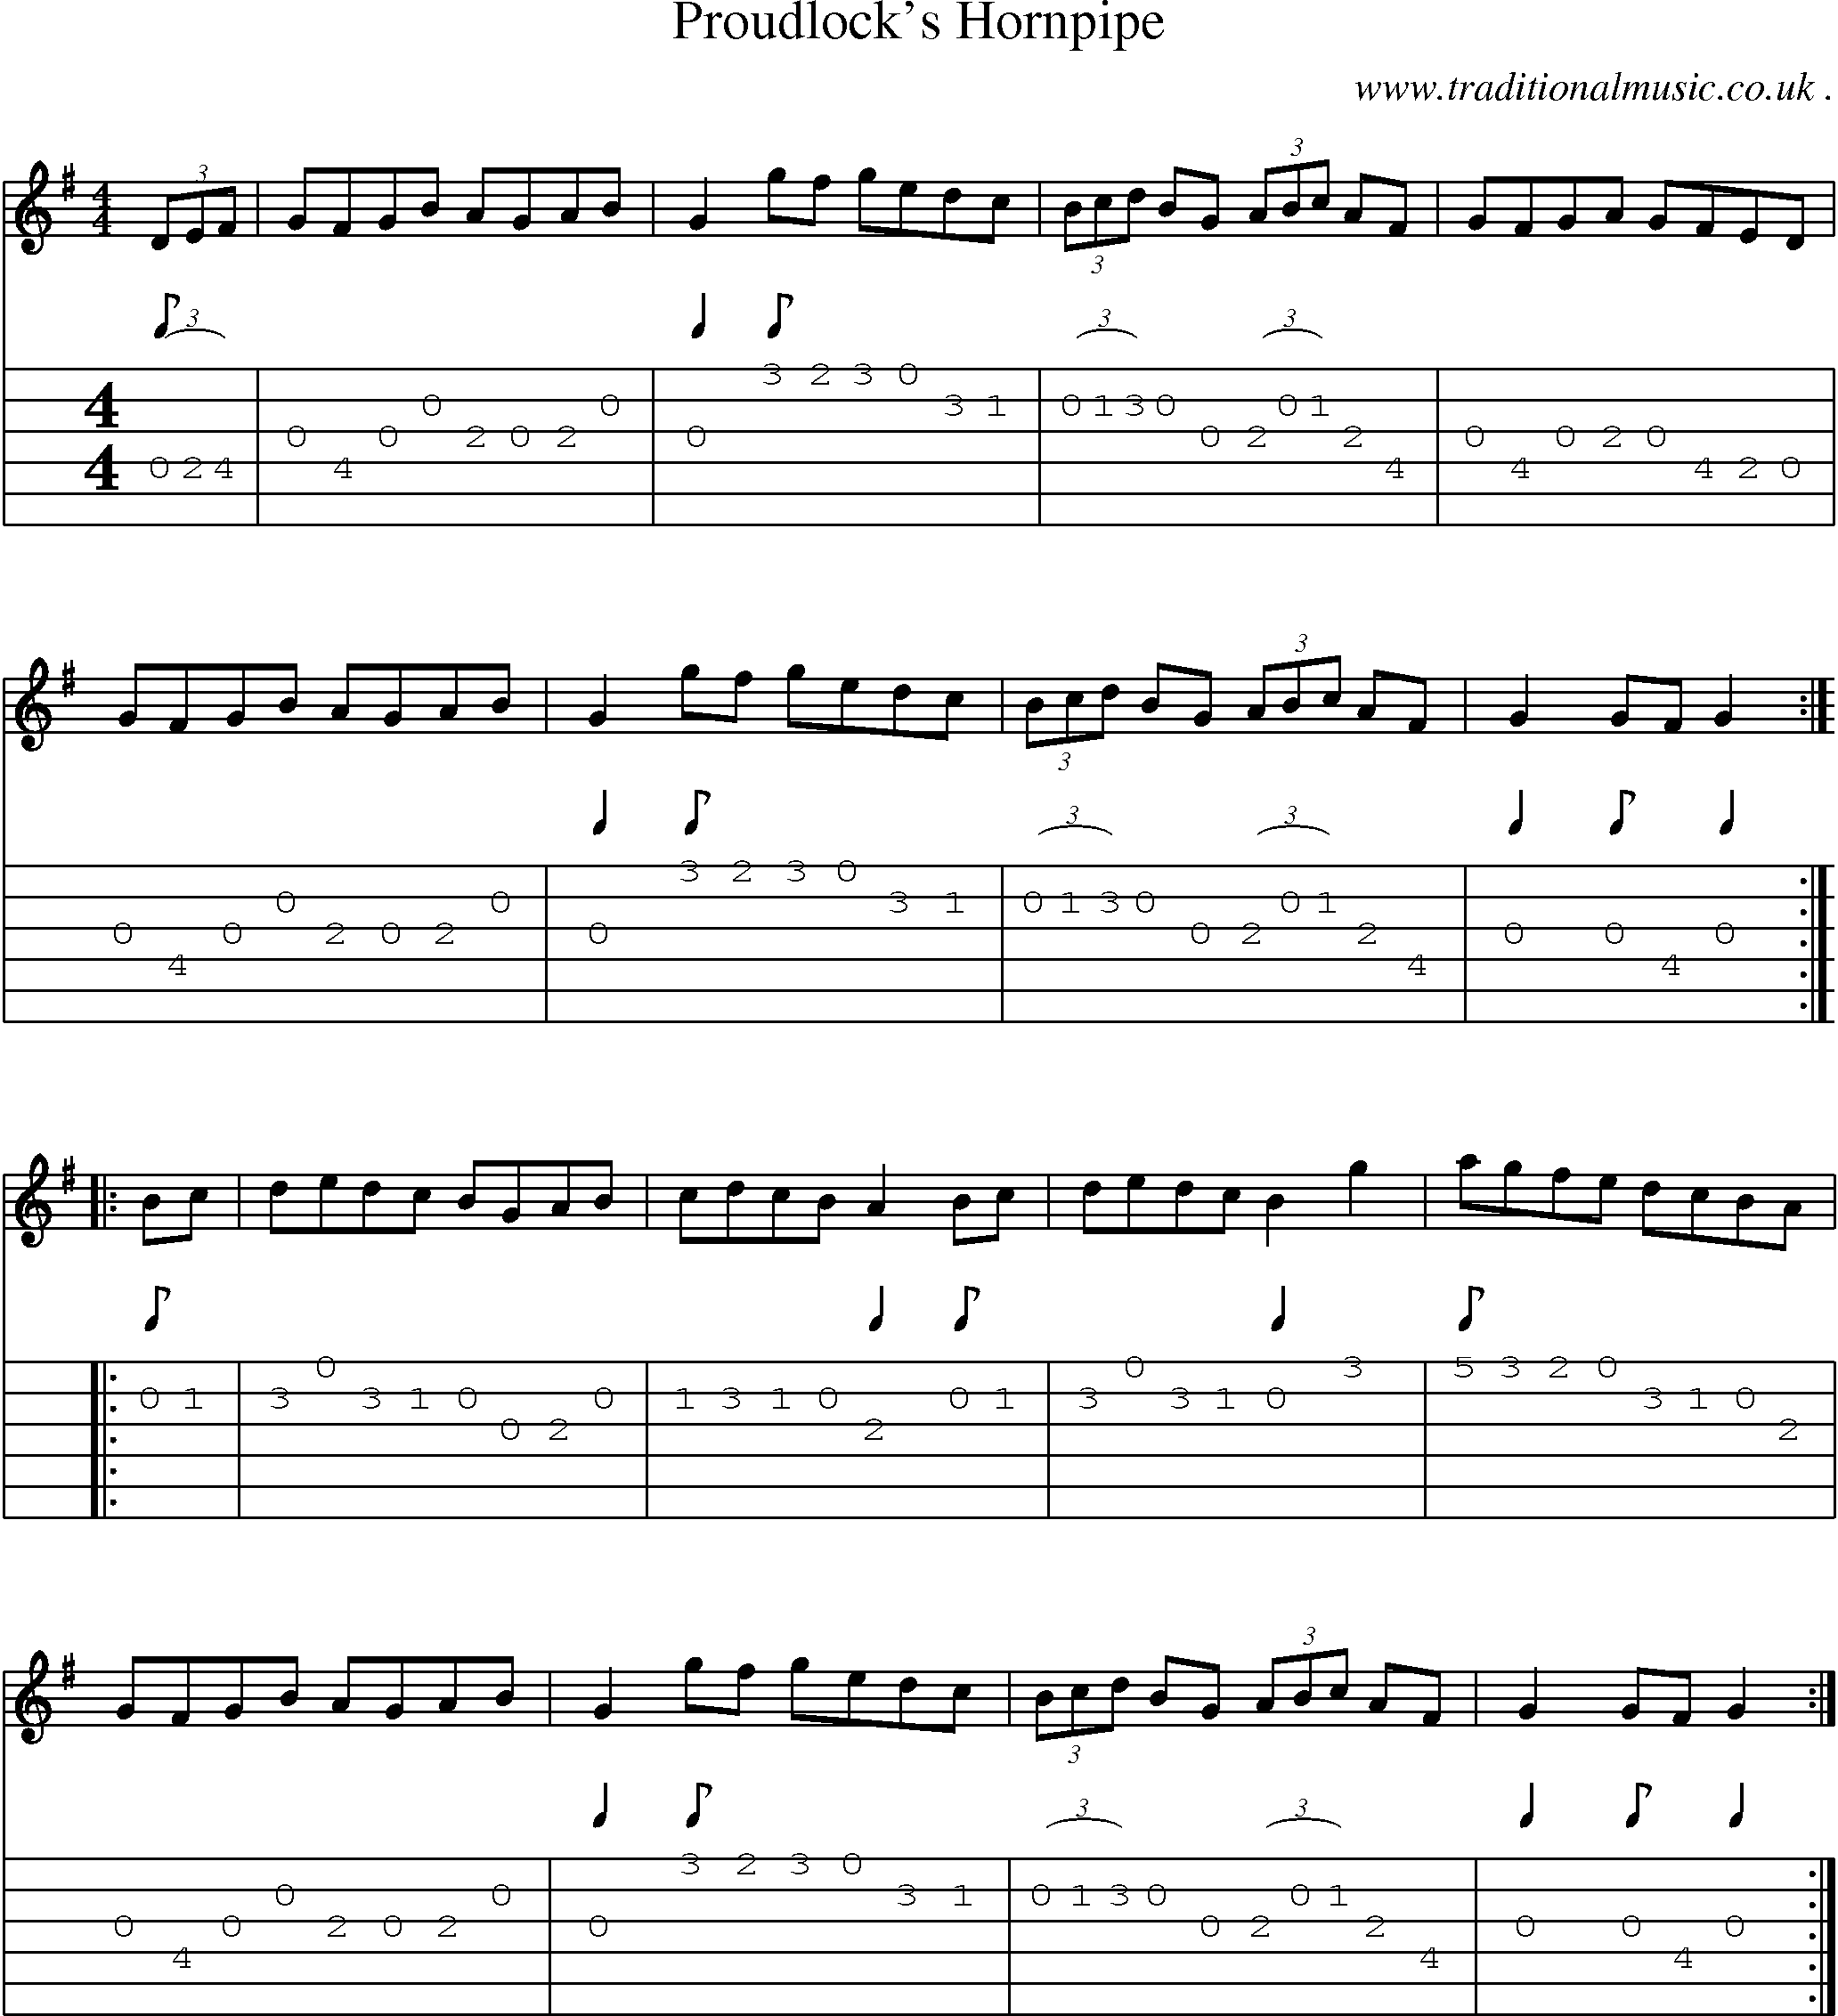 Sheet-Music and Guitar Tabs for Proudlocks Hornpipe